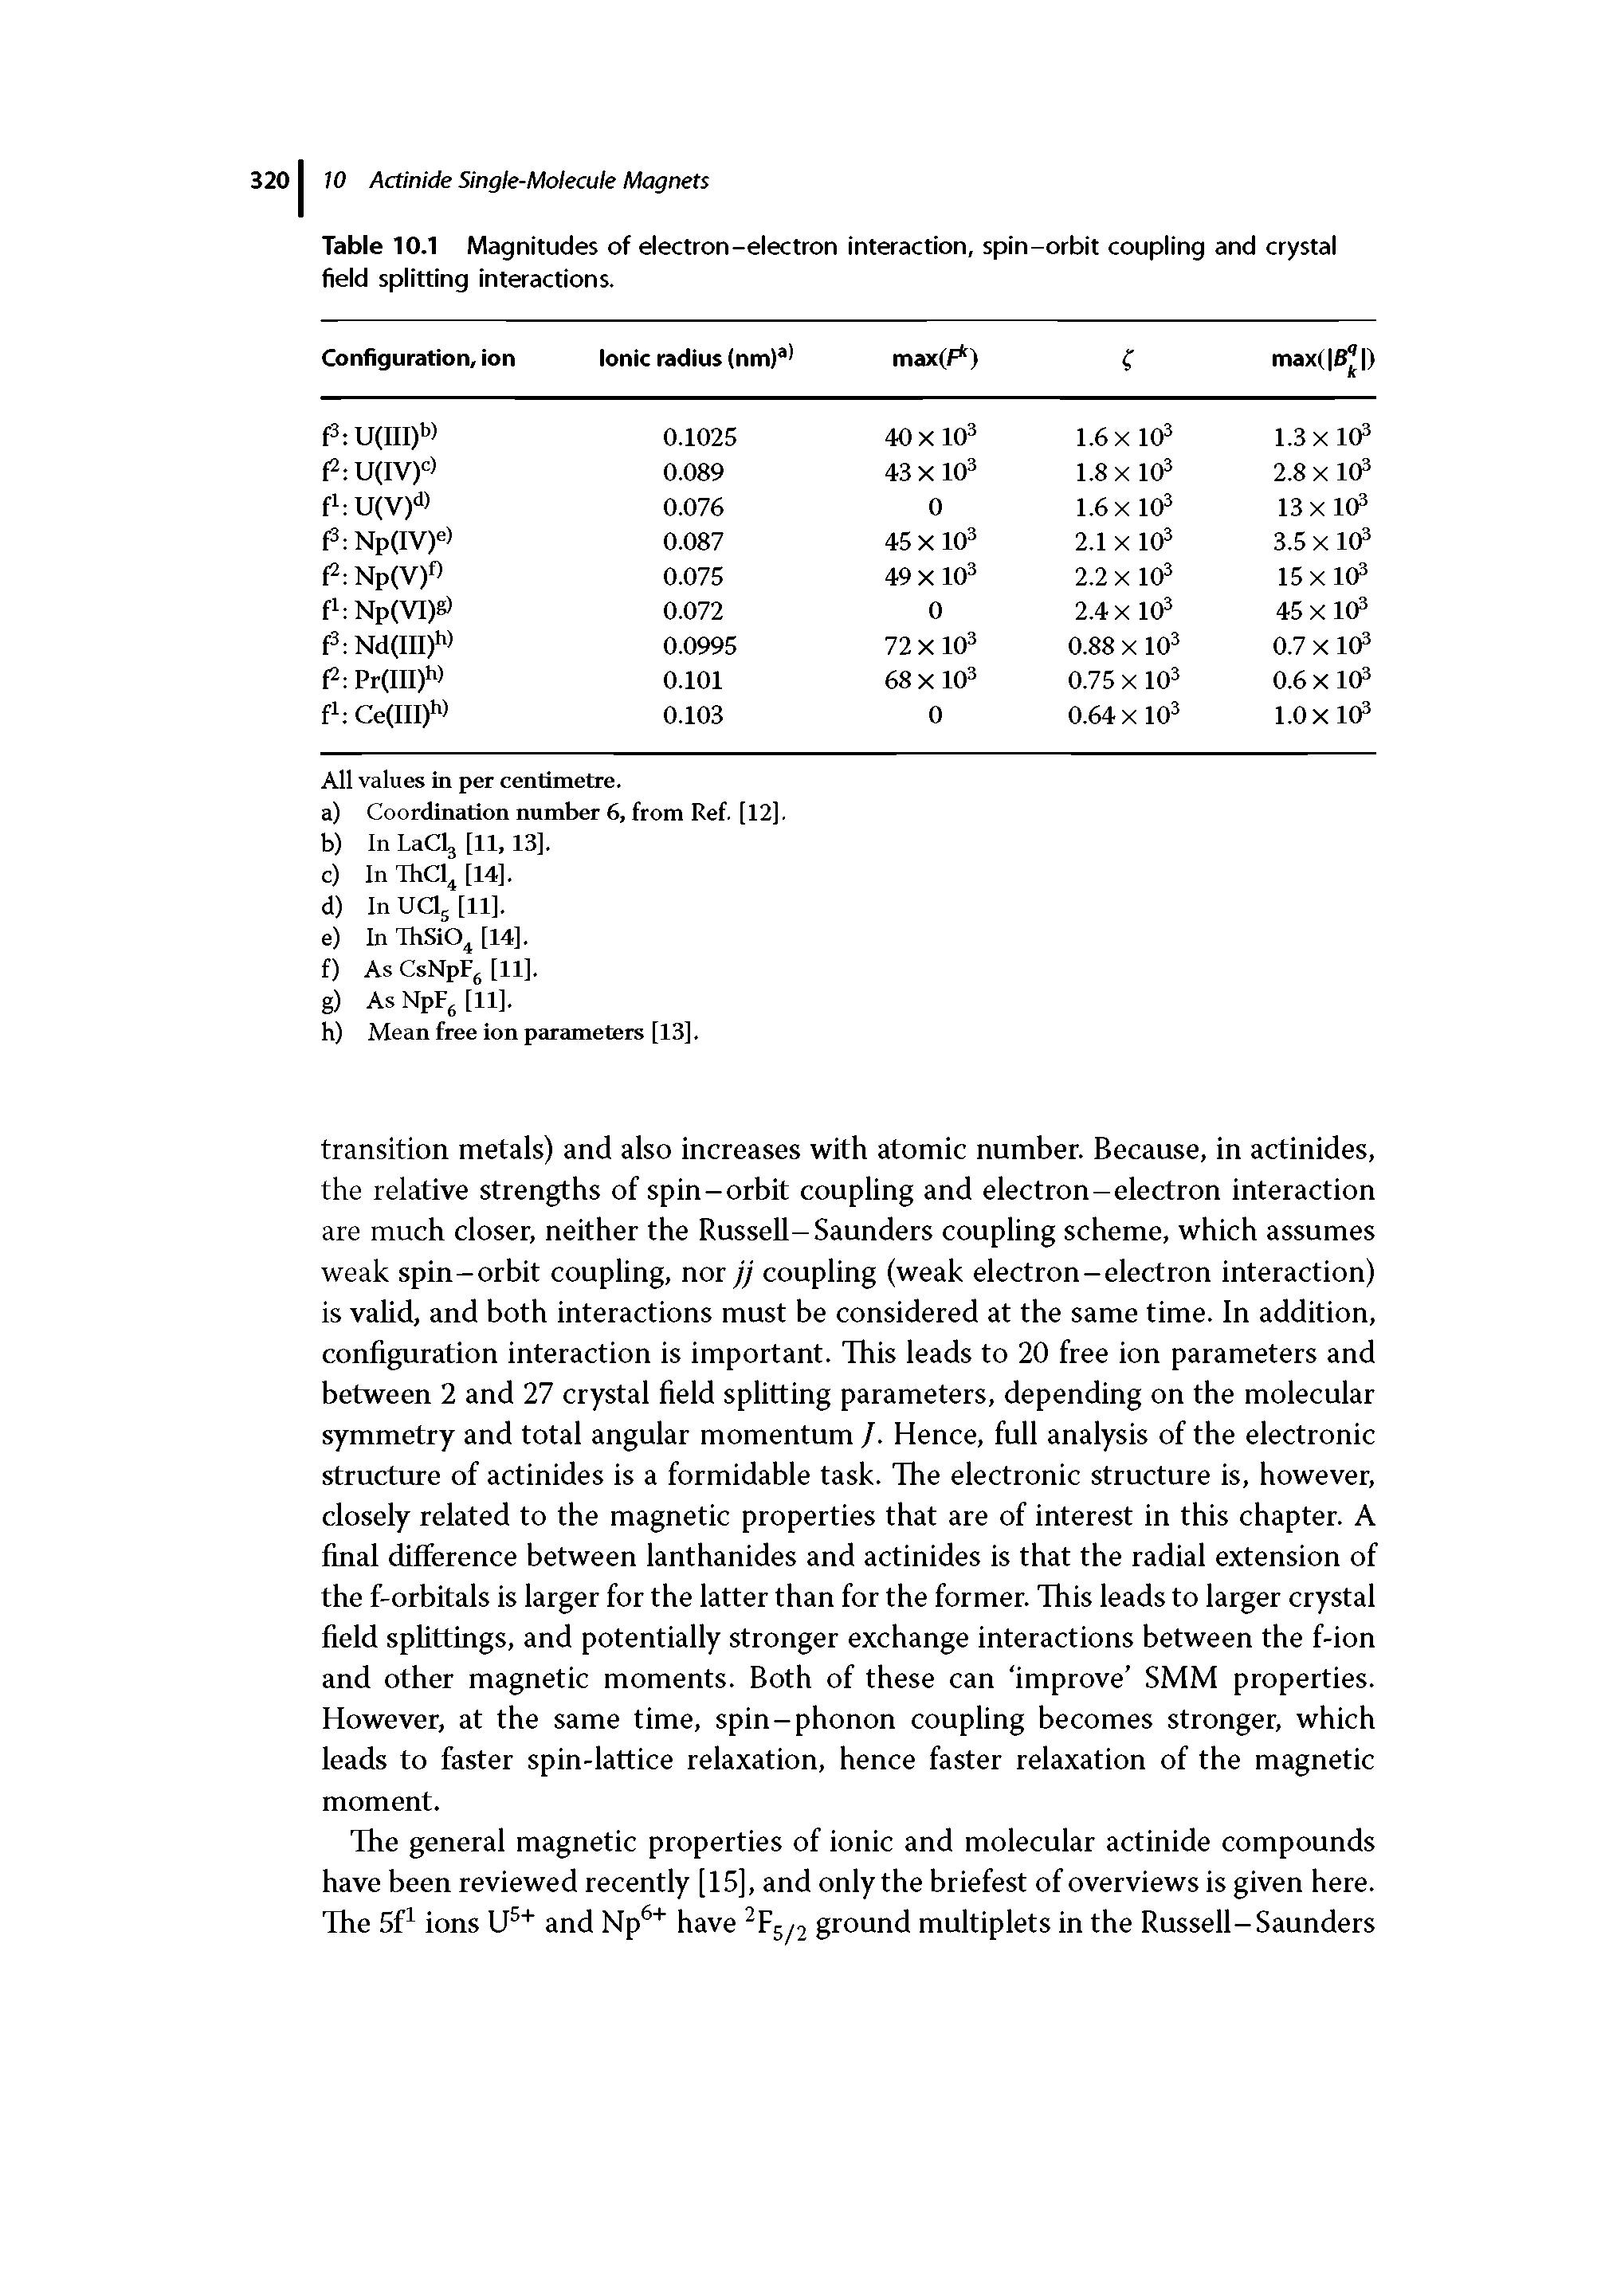 Table 10.1 Magnitudes of electron-electron interaction, spin-orbit coupling and crystal field splitting interactions.